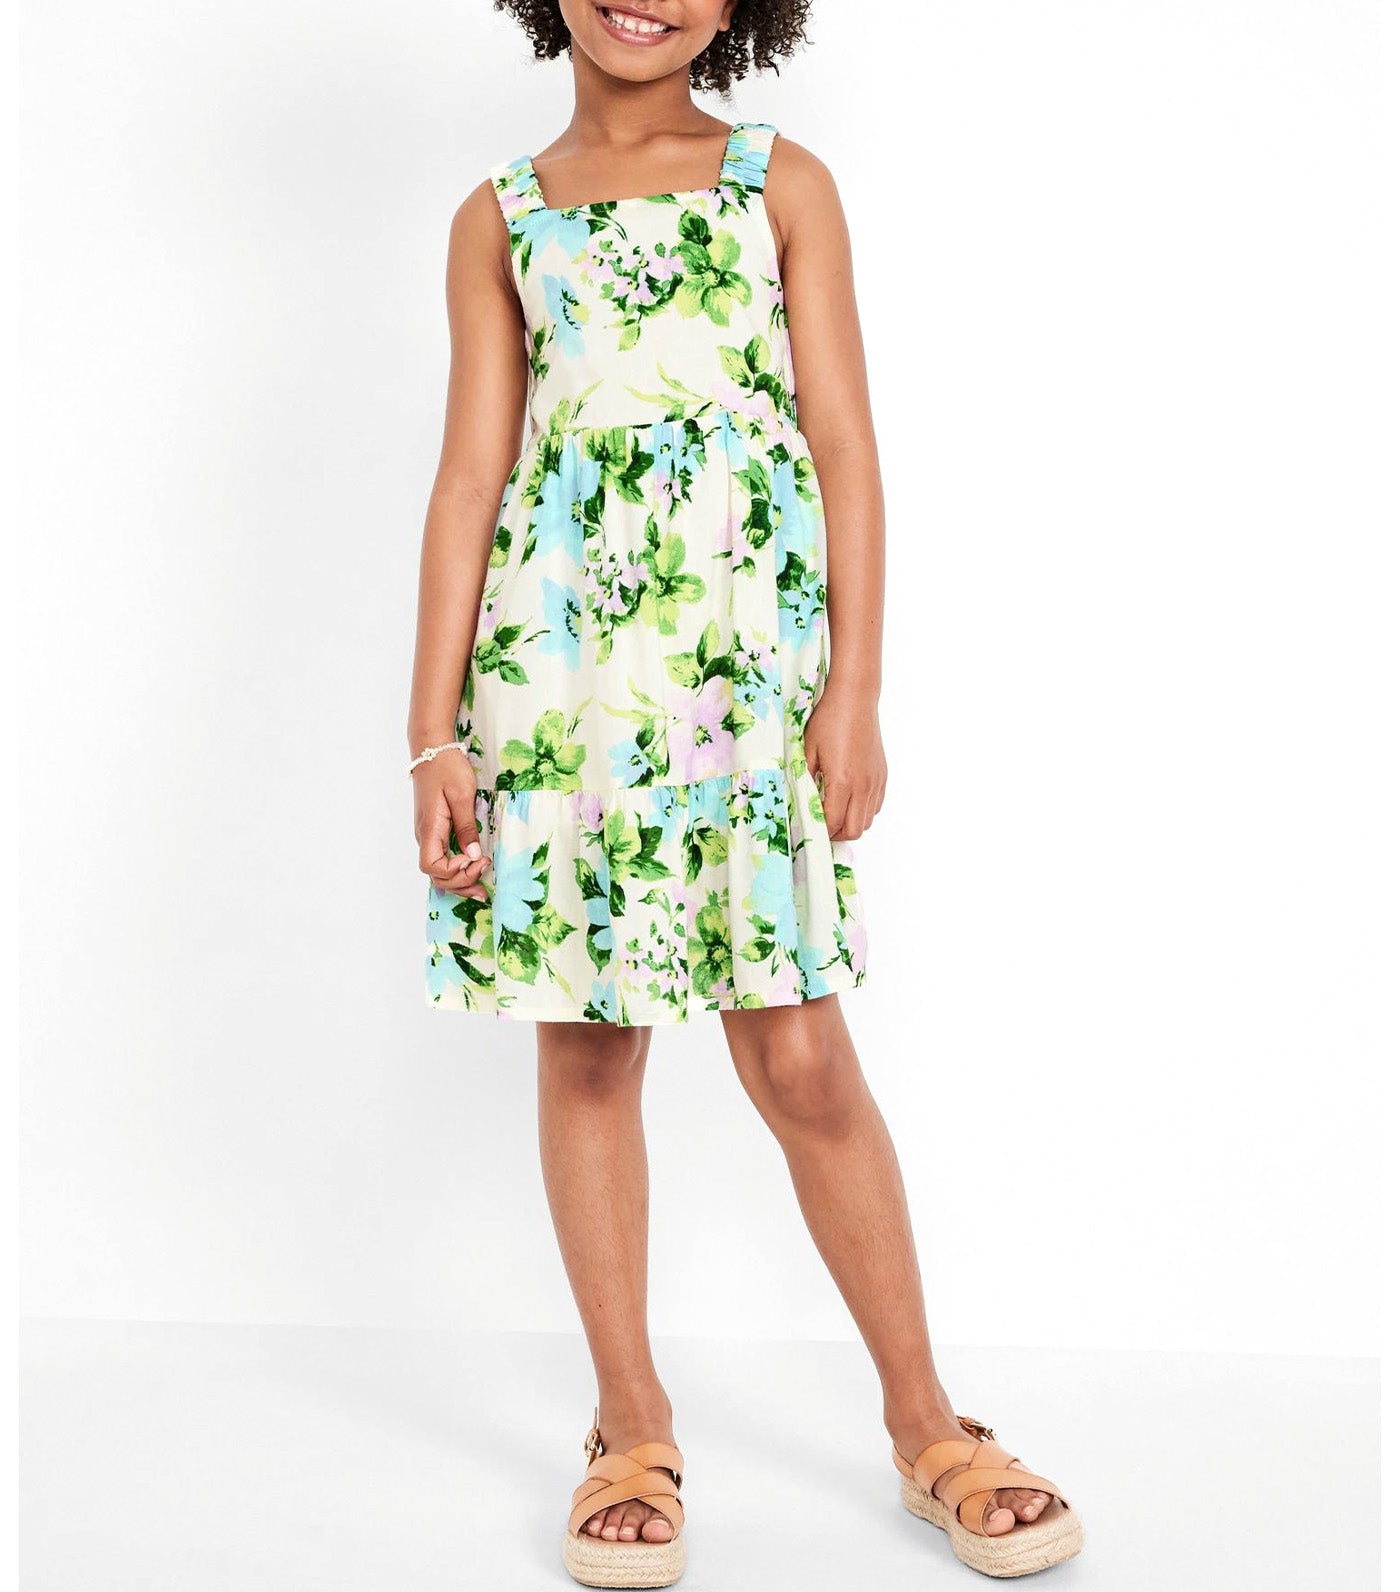 Printed Sleeveless Tiered Dress for Girls Cream Floral